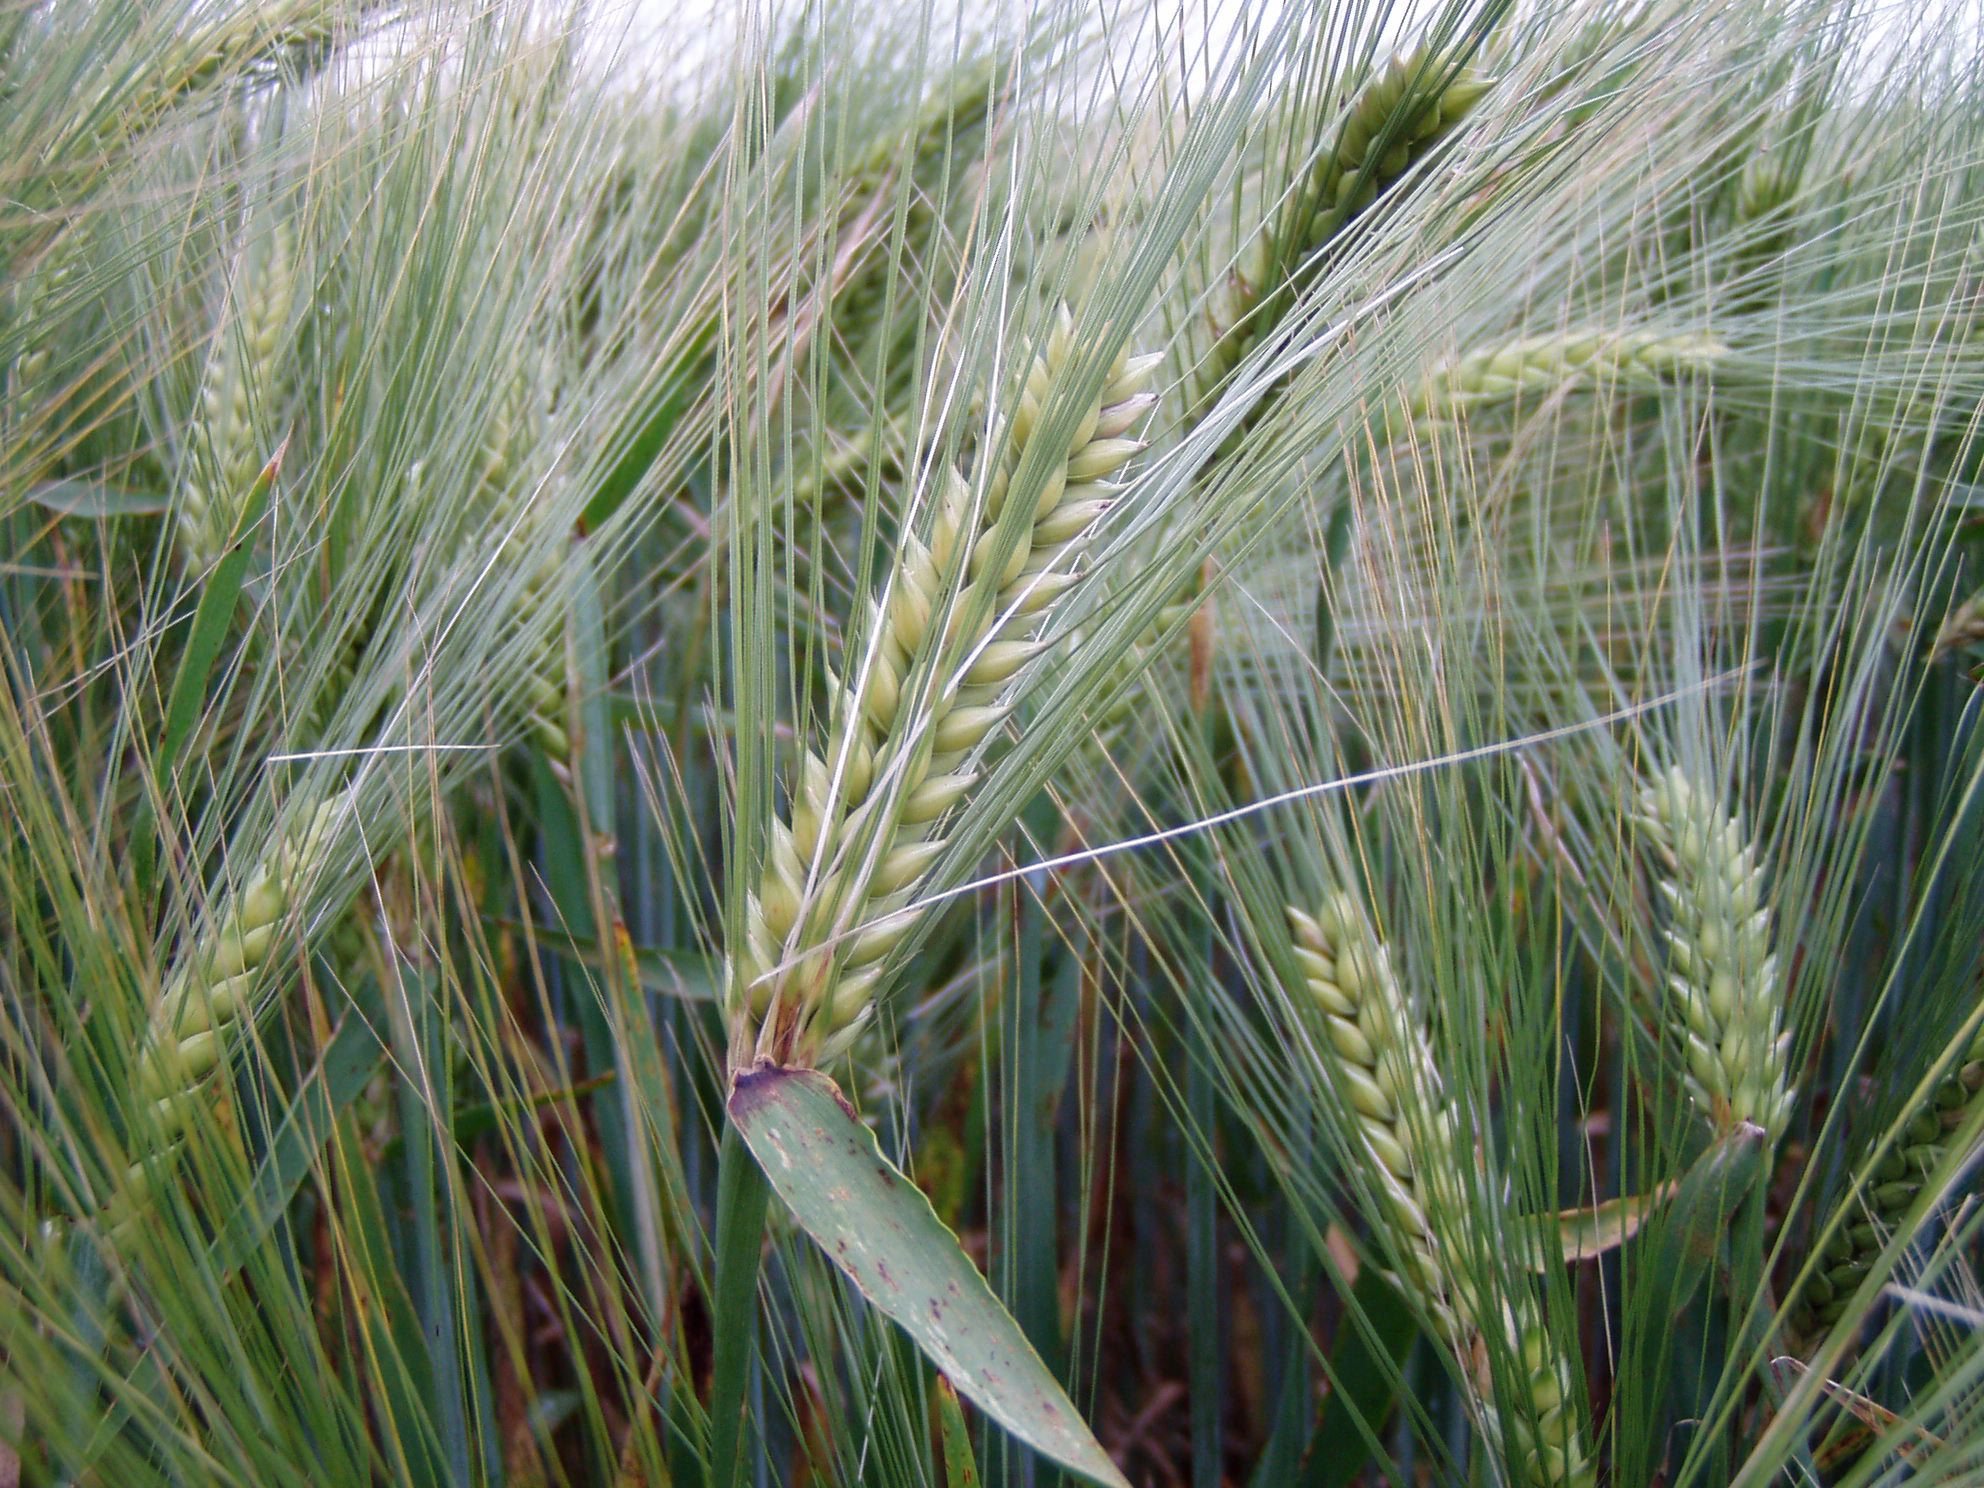 Photograph of ears (inflorescences)of barley, showing the long awns.